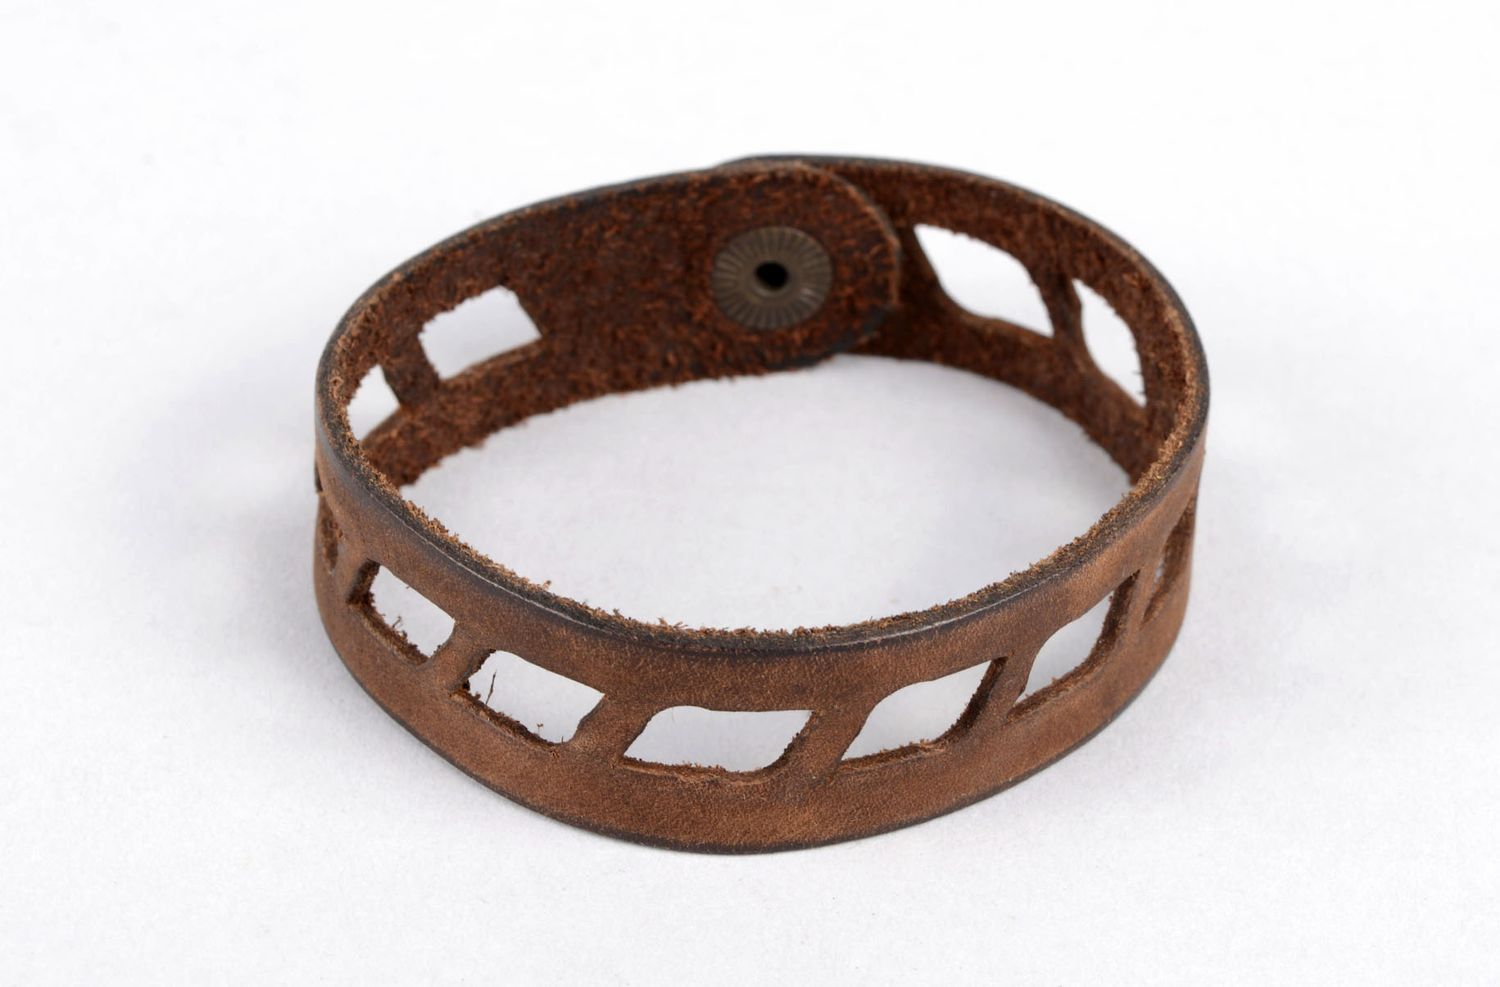 Handmade leather bracelet fashion jewelry present for friend leather accessories photo 1